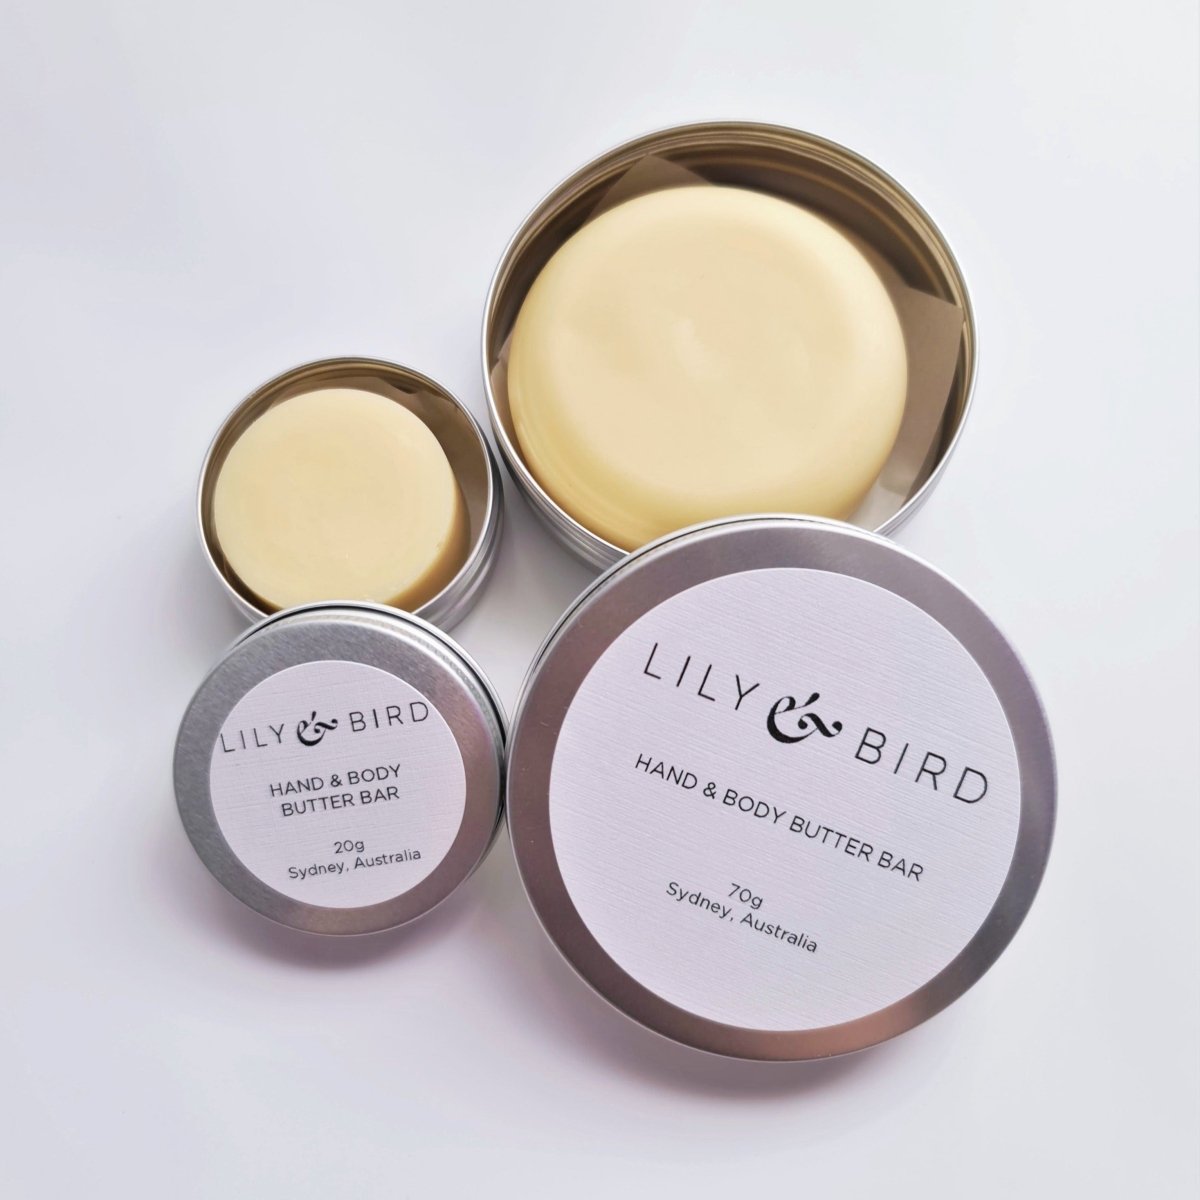 Hand & Body Butter Bar - Lily and Bird